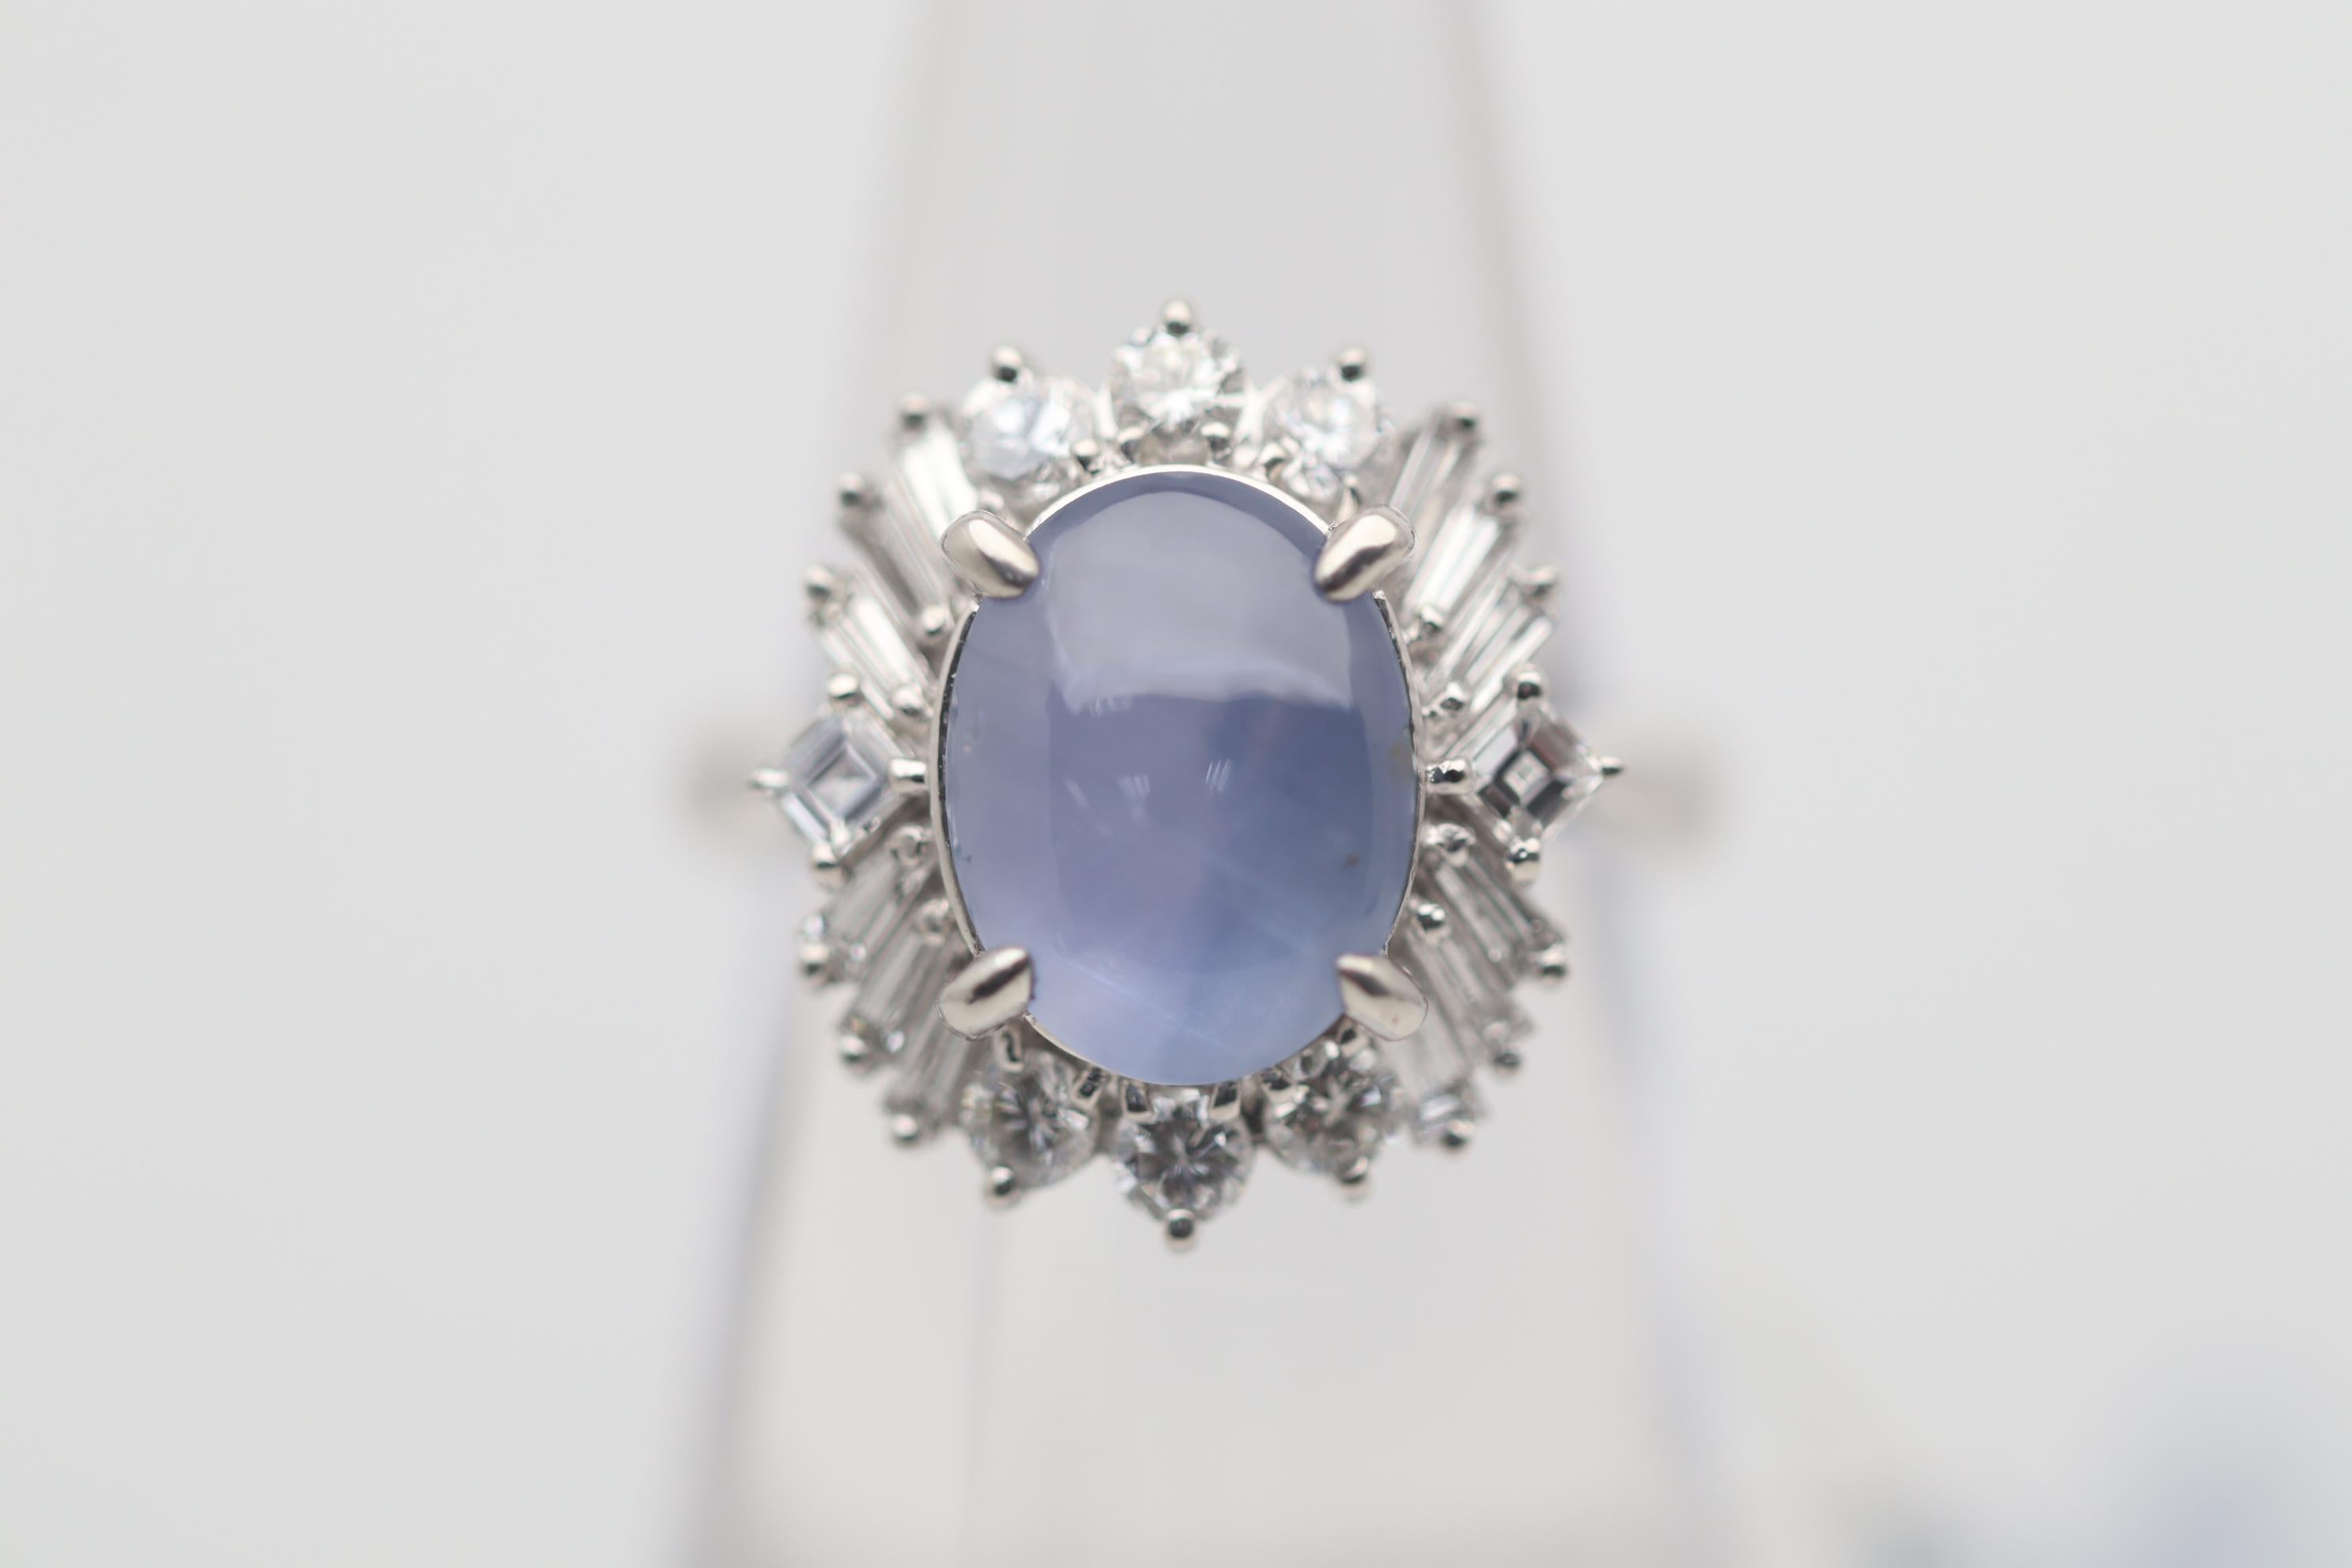 A stylish and brilliant ring featuring a 6.00 carat star sapphire. It has an even soft blue color along with a strong 6-rayed star when a light hits its top. Dazzling the sapphire are a variety of fancy shaped diamonds weighing a total of 0.93